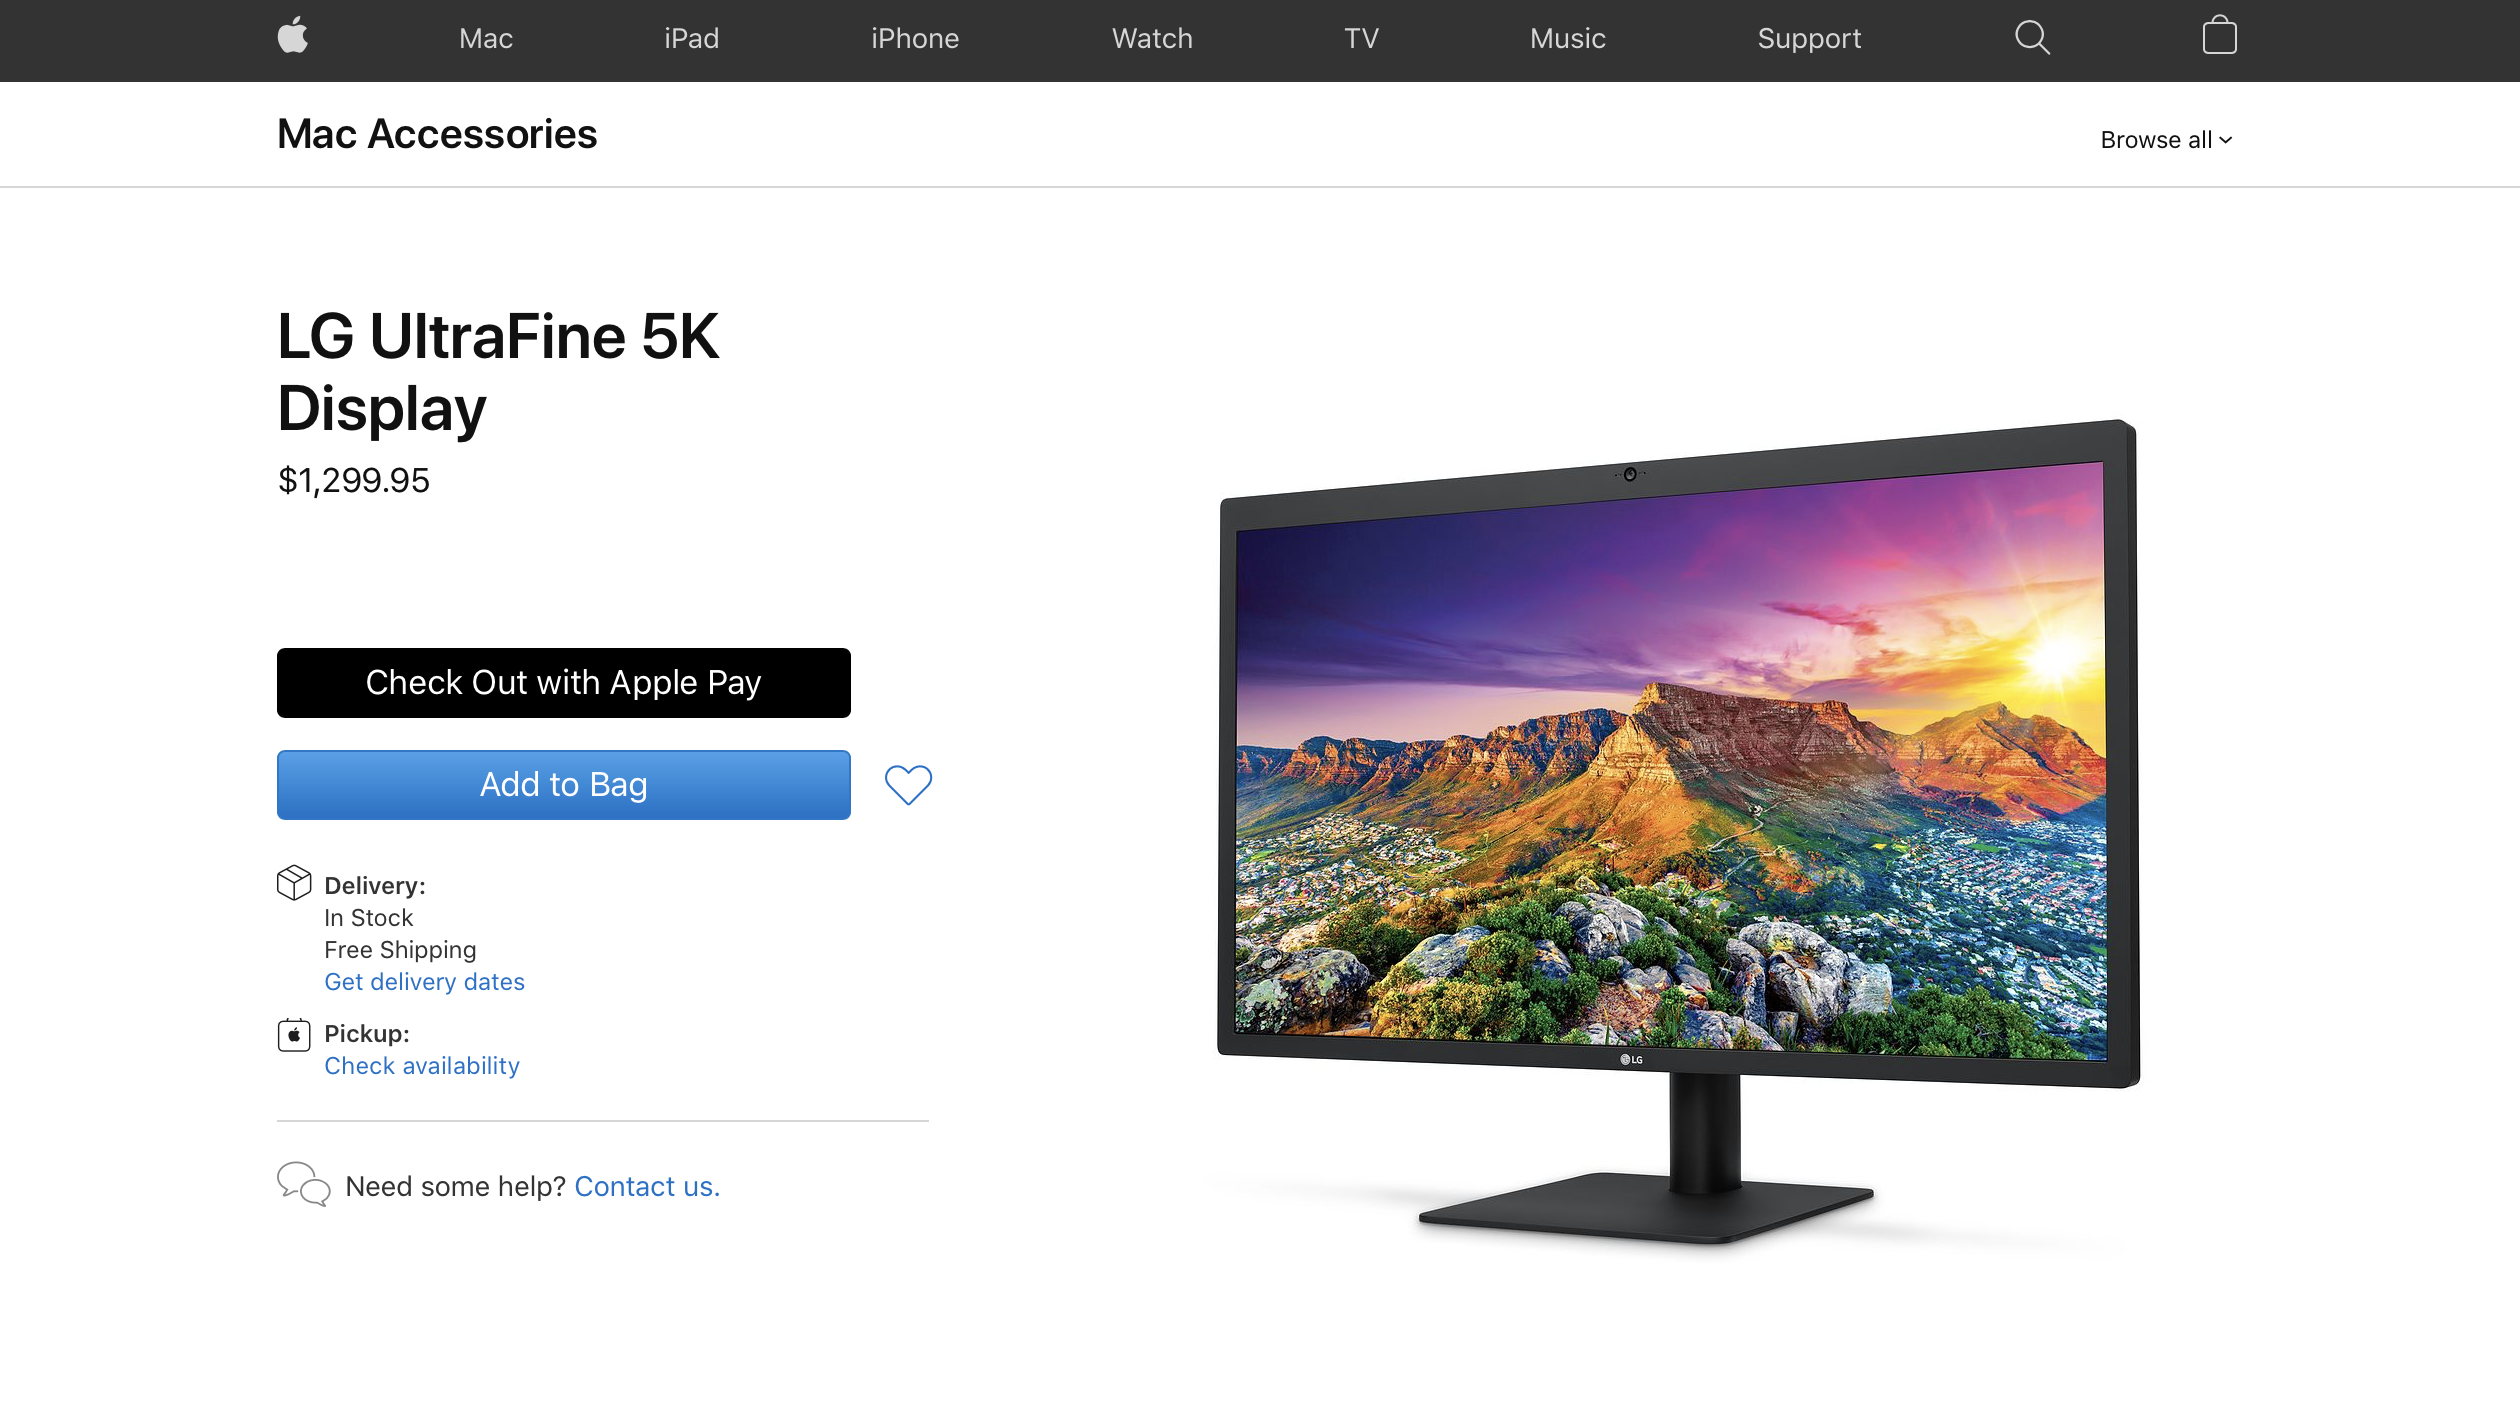 27-inch LG UltraFine 5K screen removed from online Apple stores across Europe